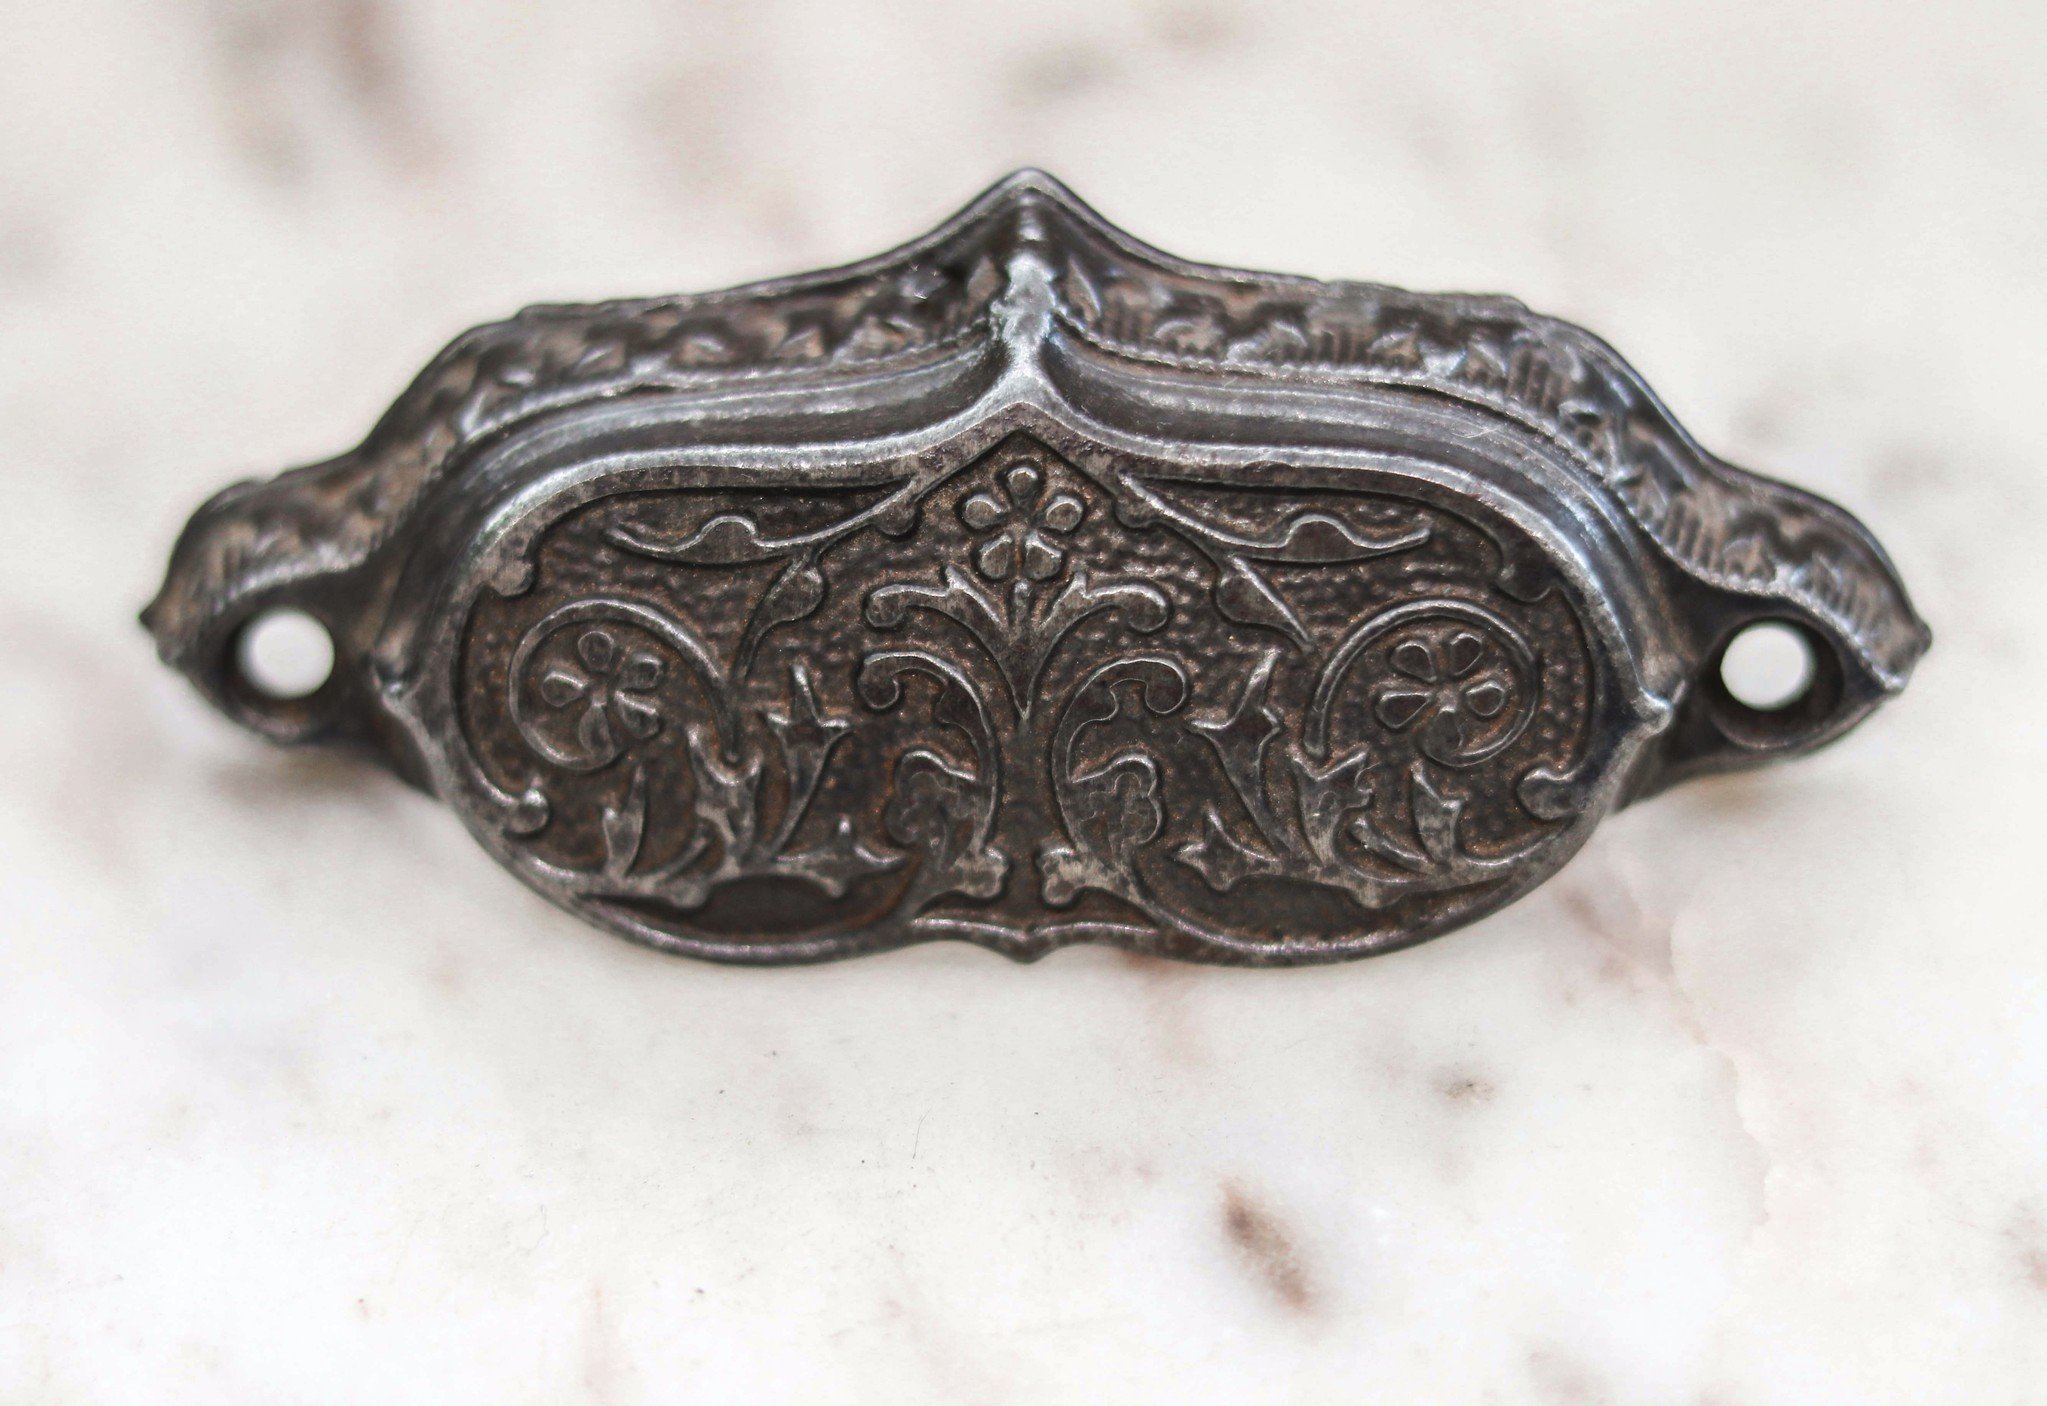 Eastlake Drawer Pull Dead People's Stuff "Architectural Antiques